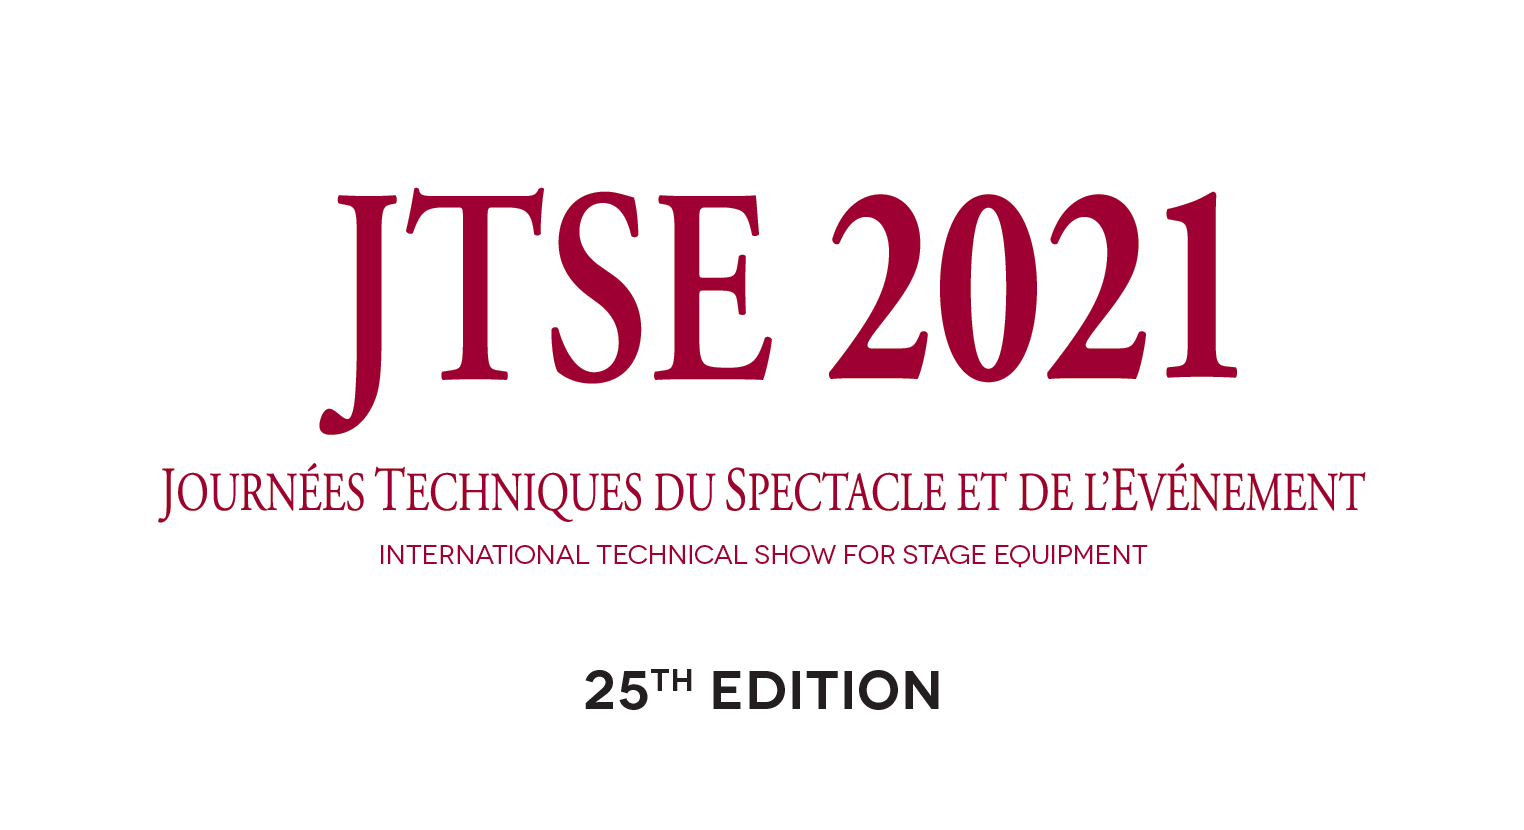 K+ will be present at the 25th edition of JTSE in Paris 2021